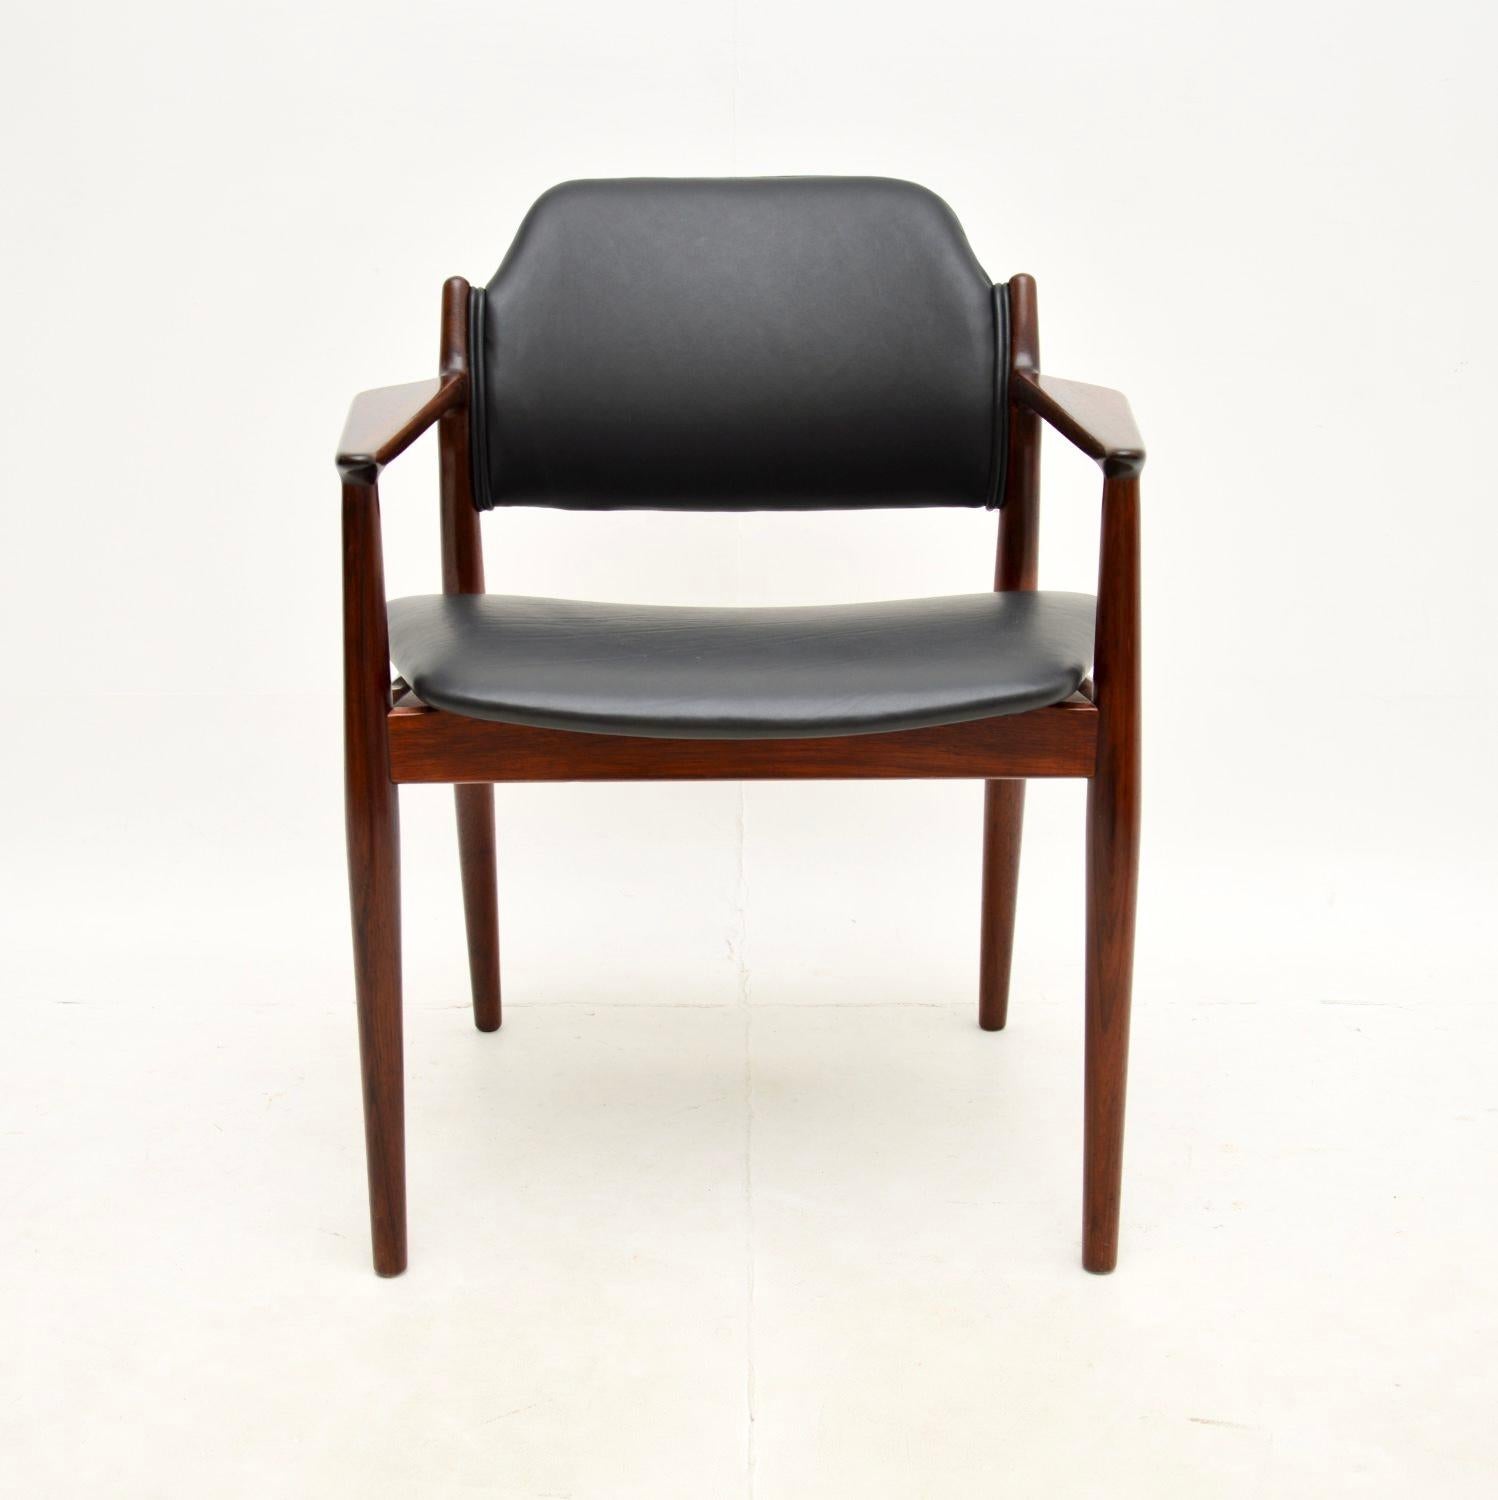 A stunning and rare vintage Danish leather armchair by Arne Vodder. This was made in Denmark by Sibast, it dates from the 1960’s.

This is the model 62a, it is of absolutely superb quality and is very comfortable. The frame is beautifully designed